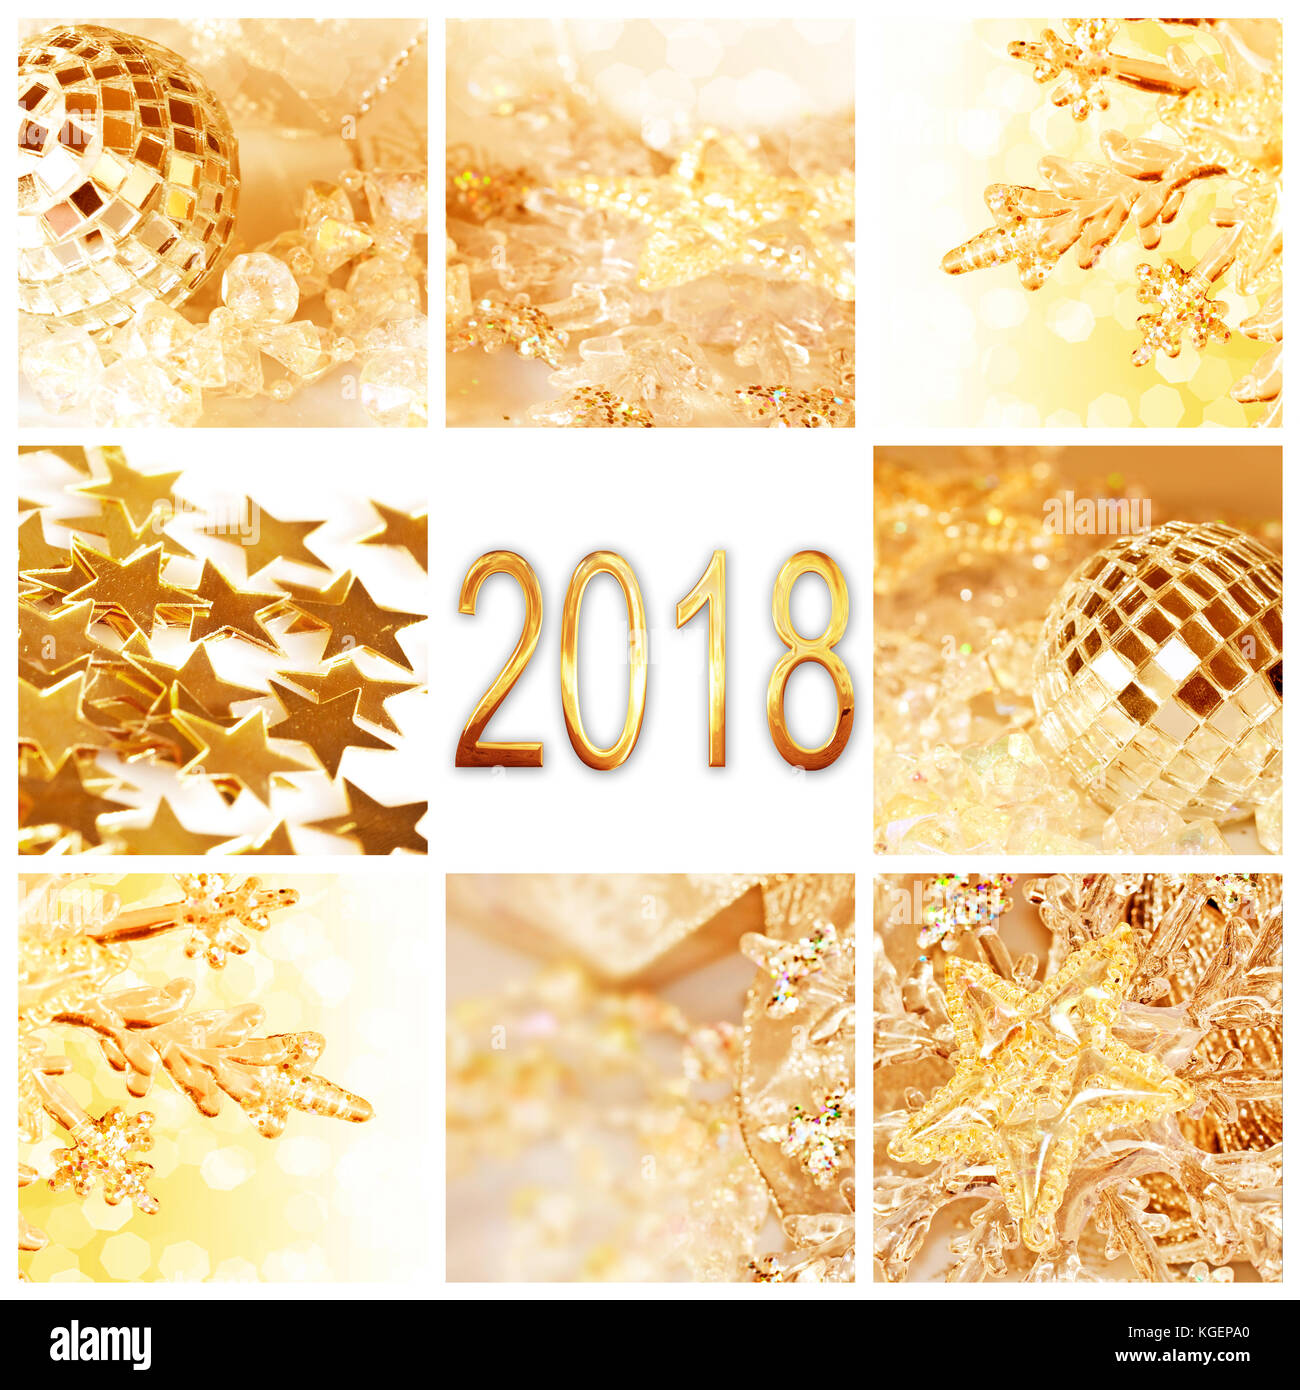 2018, golden christmas ornaments collage square greeting card Stock Photo